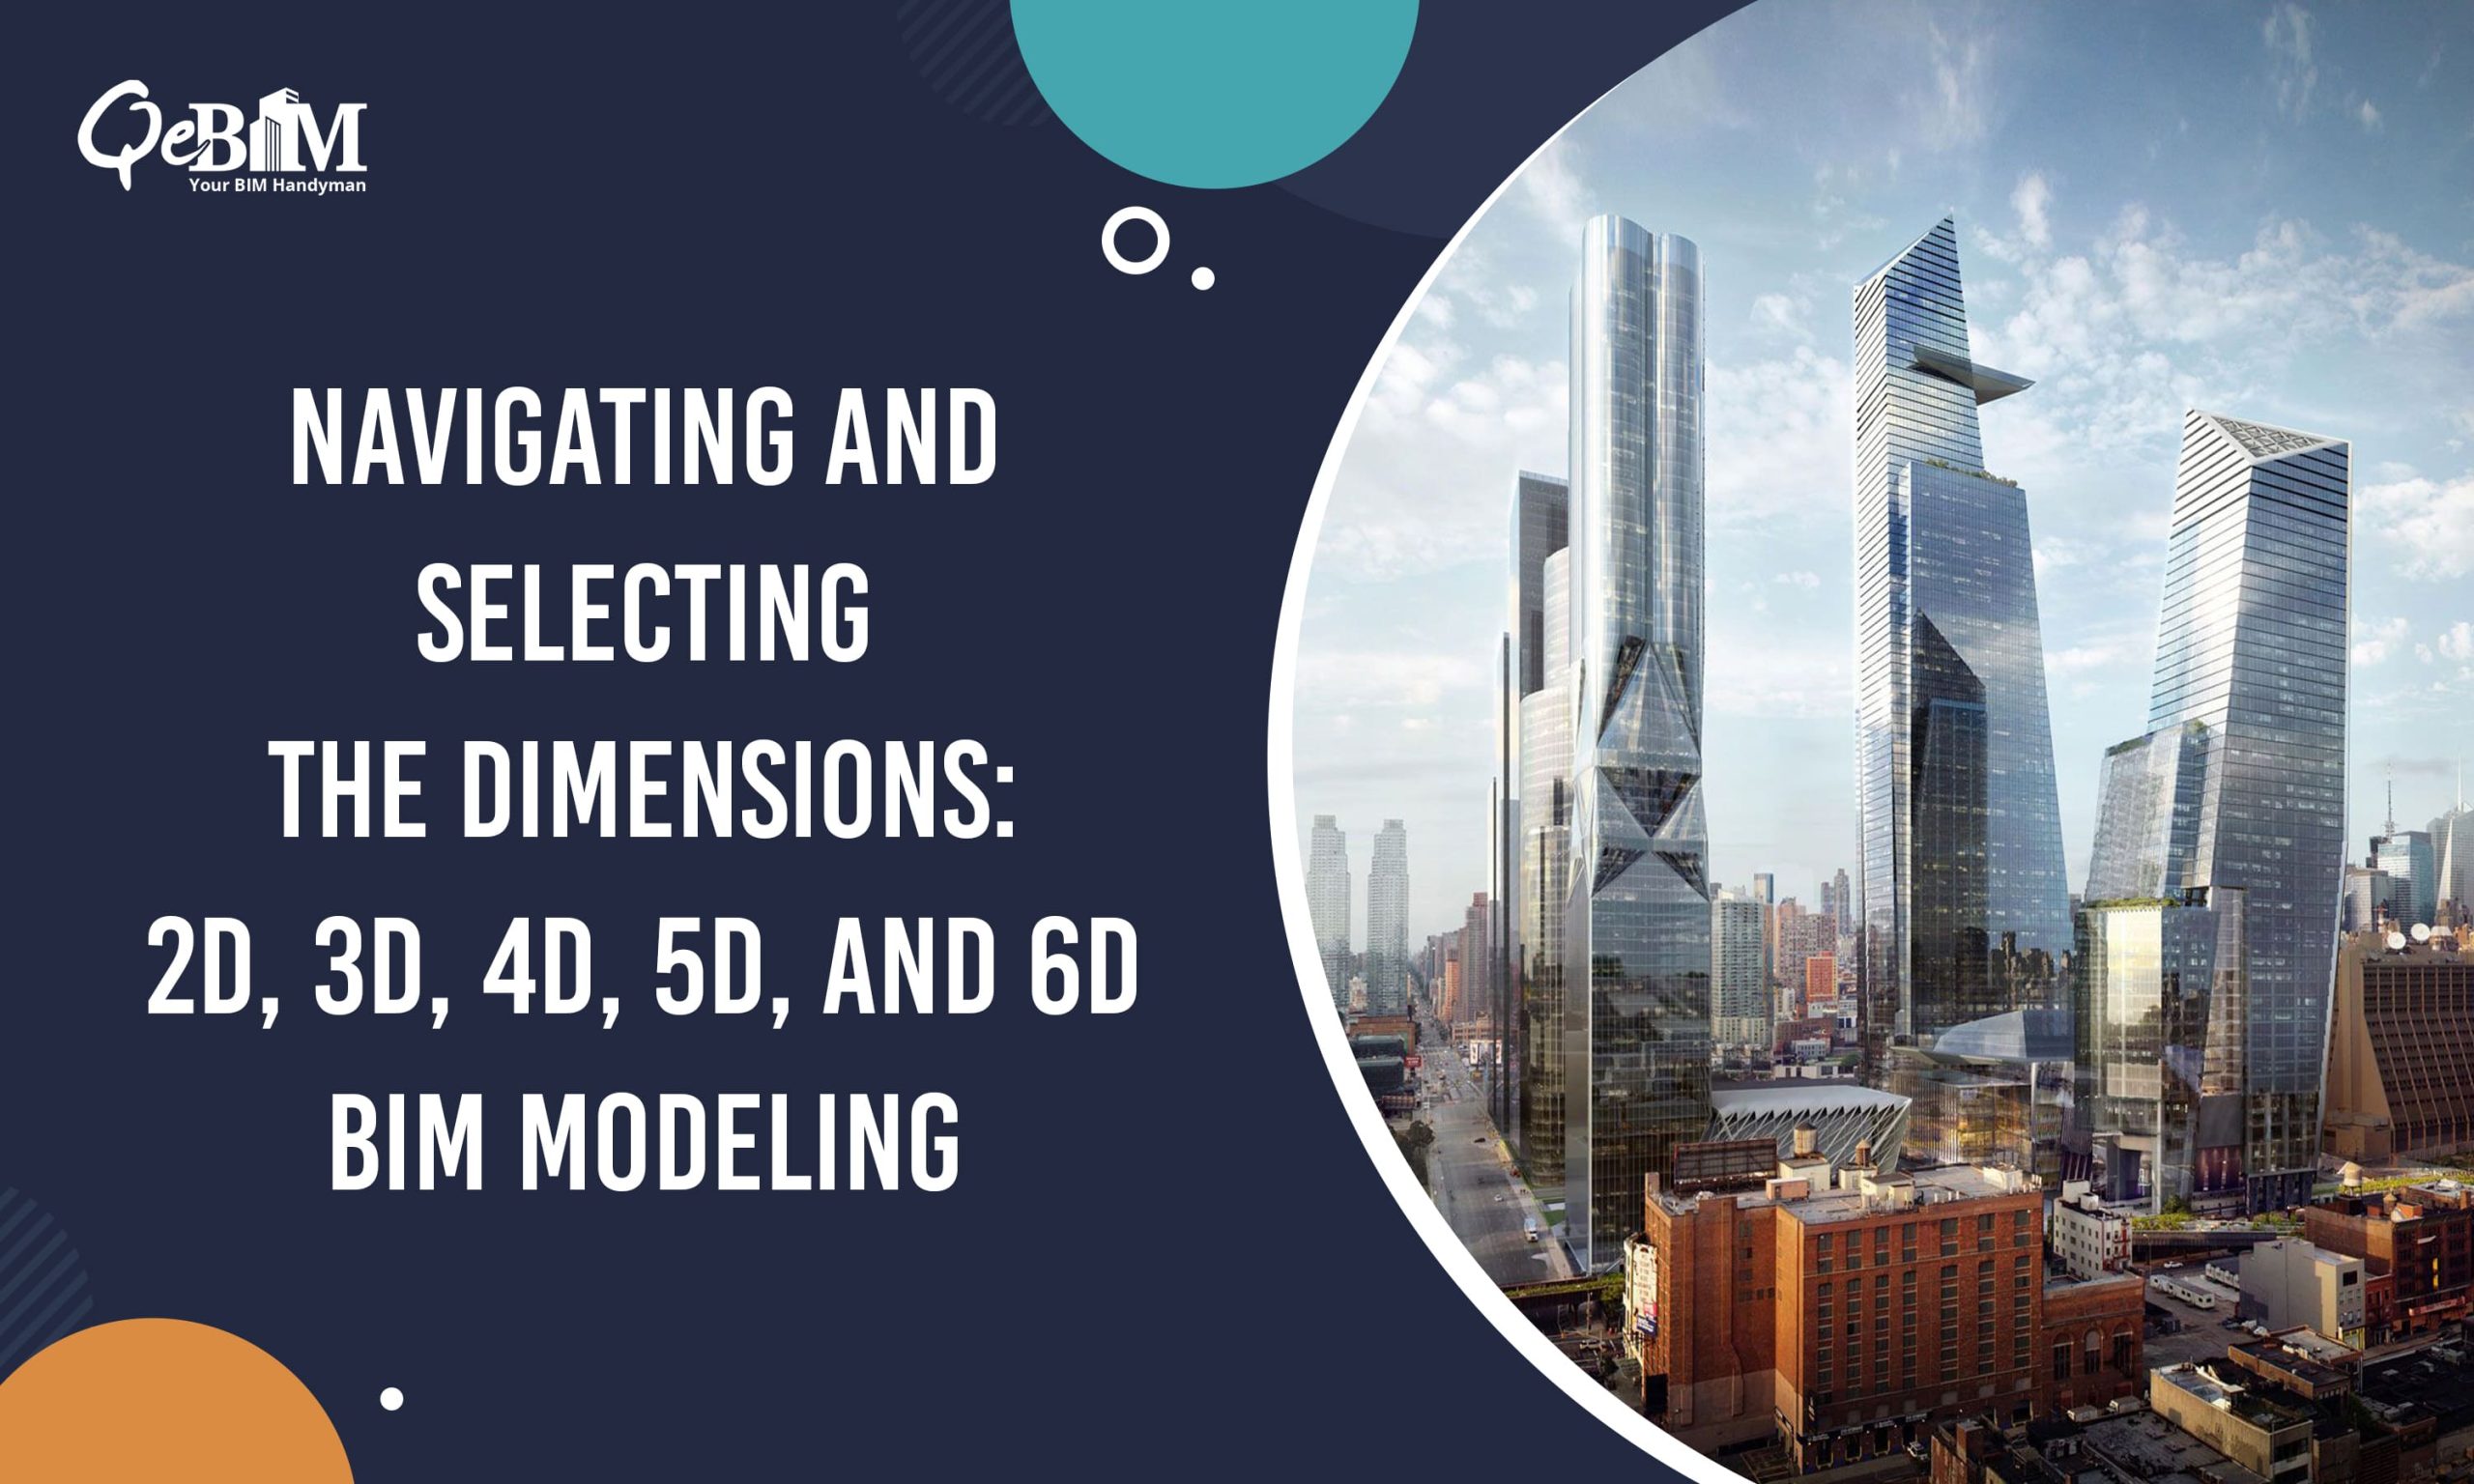 Navigating and Selecting the Dimensions: 2D, 3D, 4D, 5D, and 6D BIM Modeling